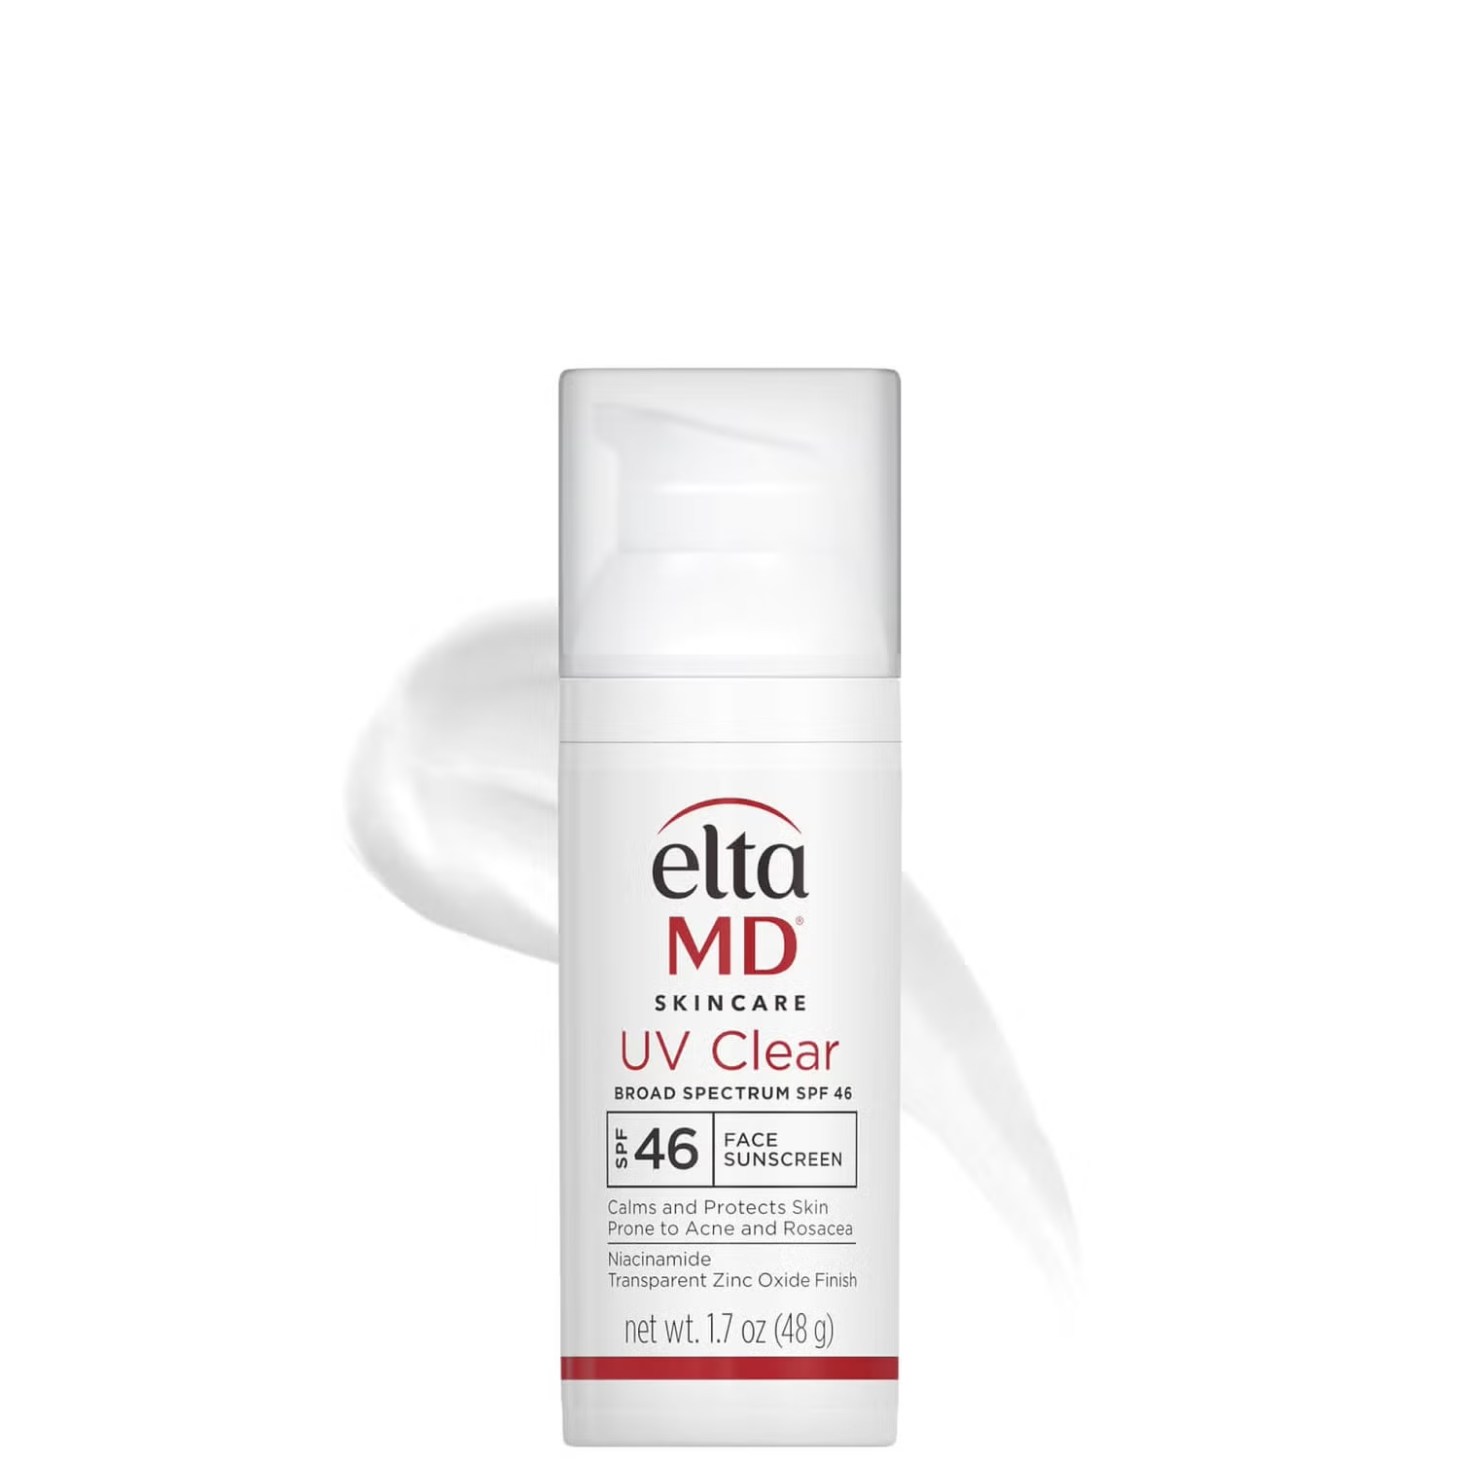 elta md uv clear spf 46, one of the best sunscreens for sensitive skin